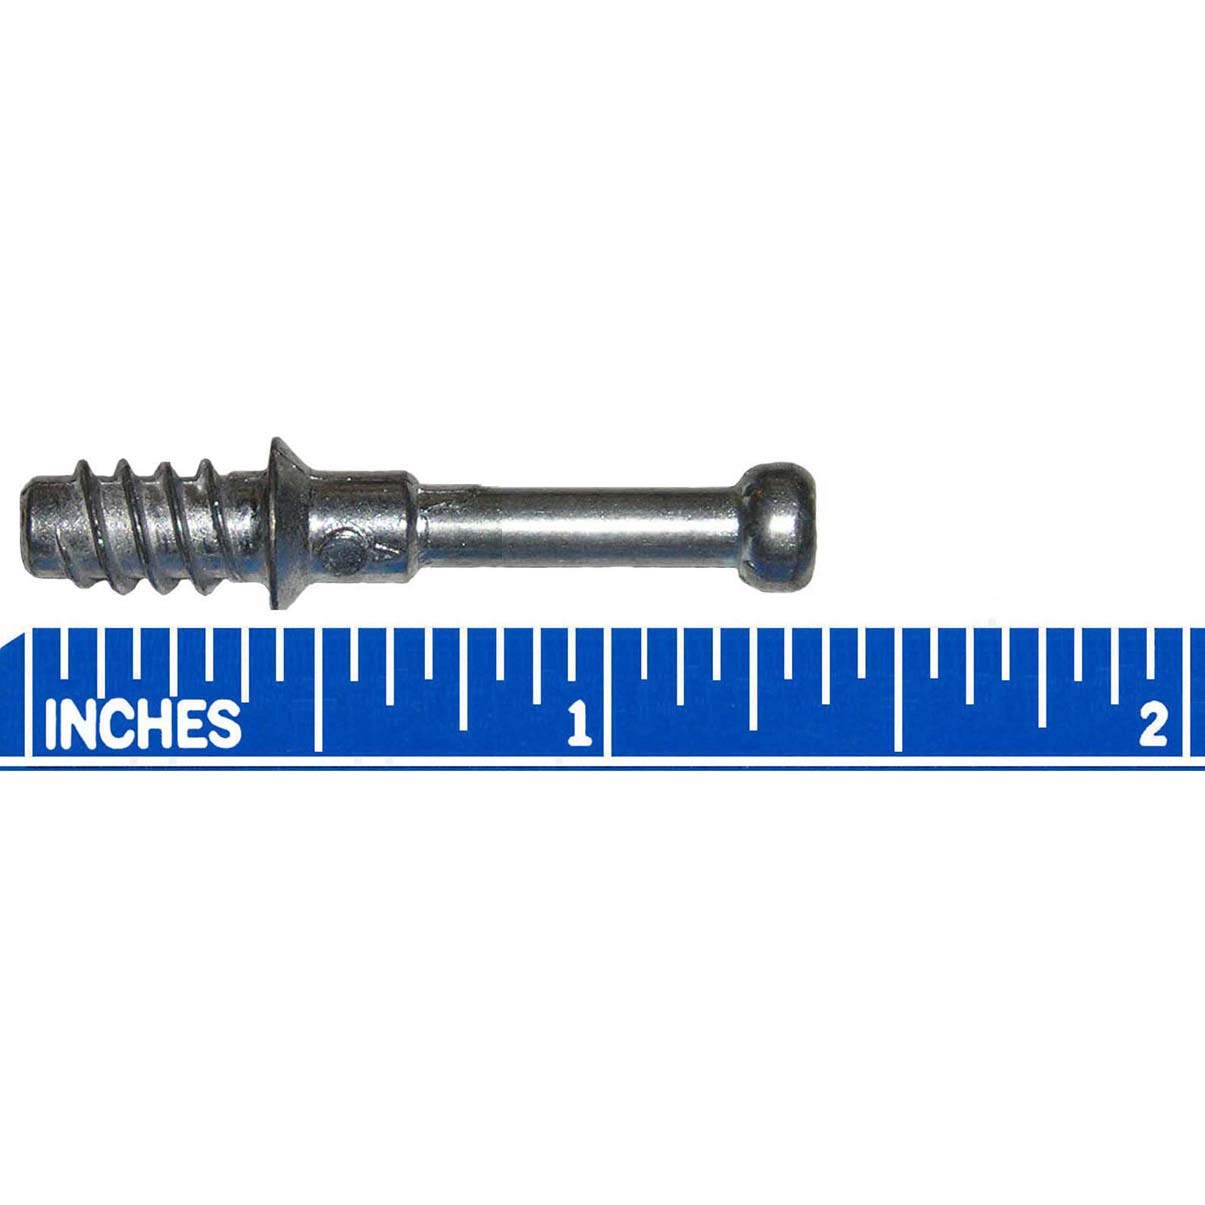 24mm (35mm Overall) Dowel Pin for Cam Lock Disc Furniture Connectors 11mm Long Euro Wood Thread Fits 5mm Hole (10 Pack) Fits Titus